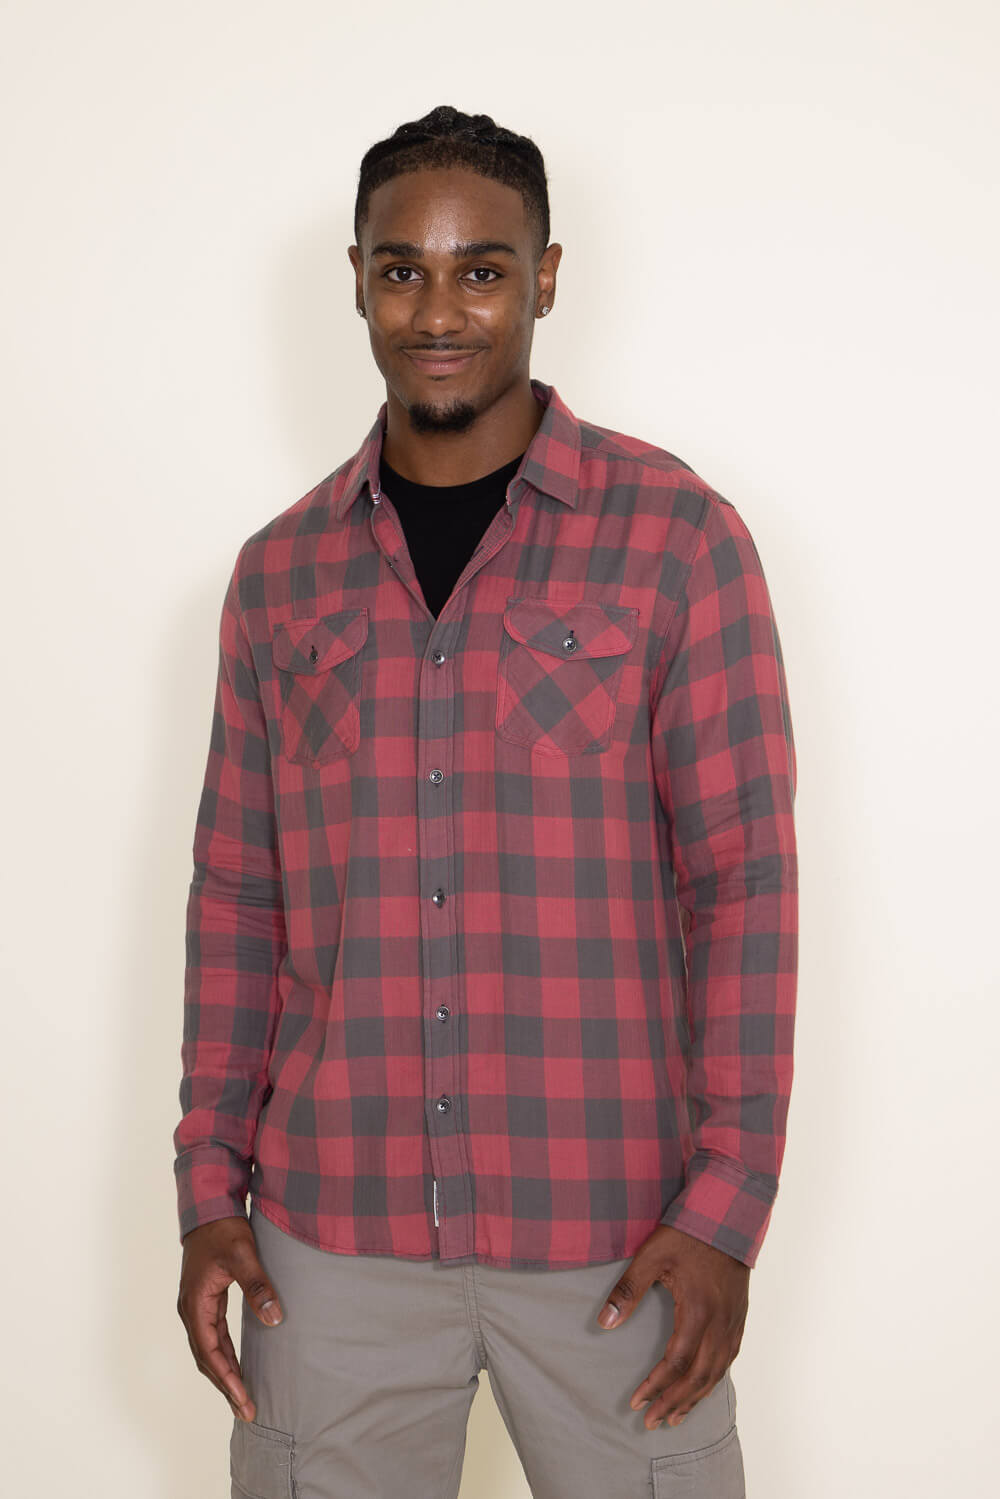 Flag & Anthem Belhaven Double Layer Plaid Shirt for Men in Red